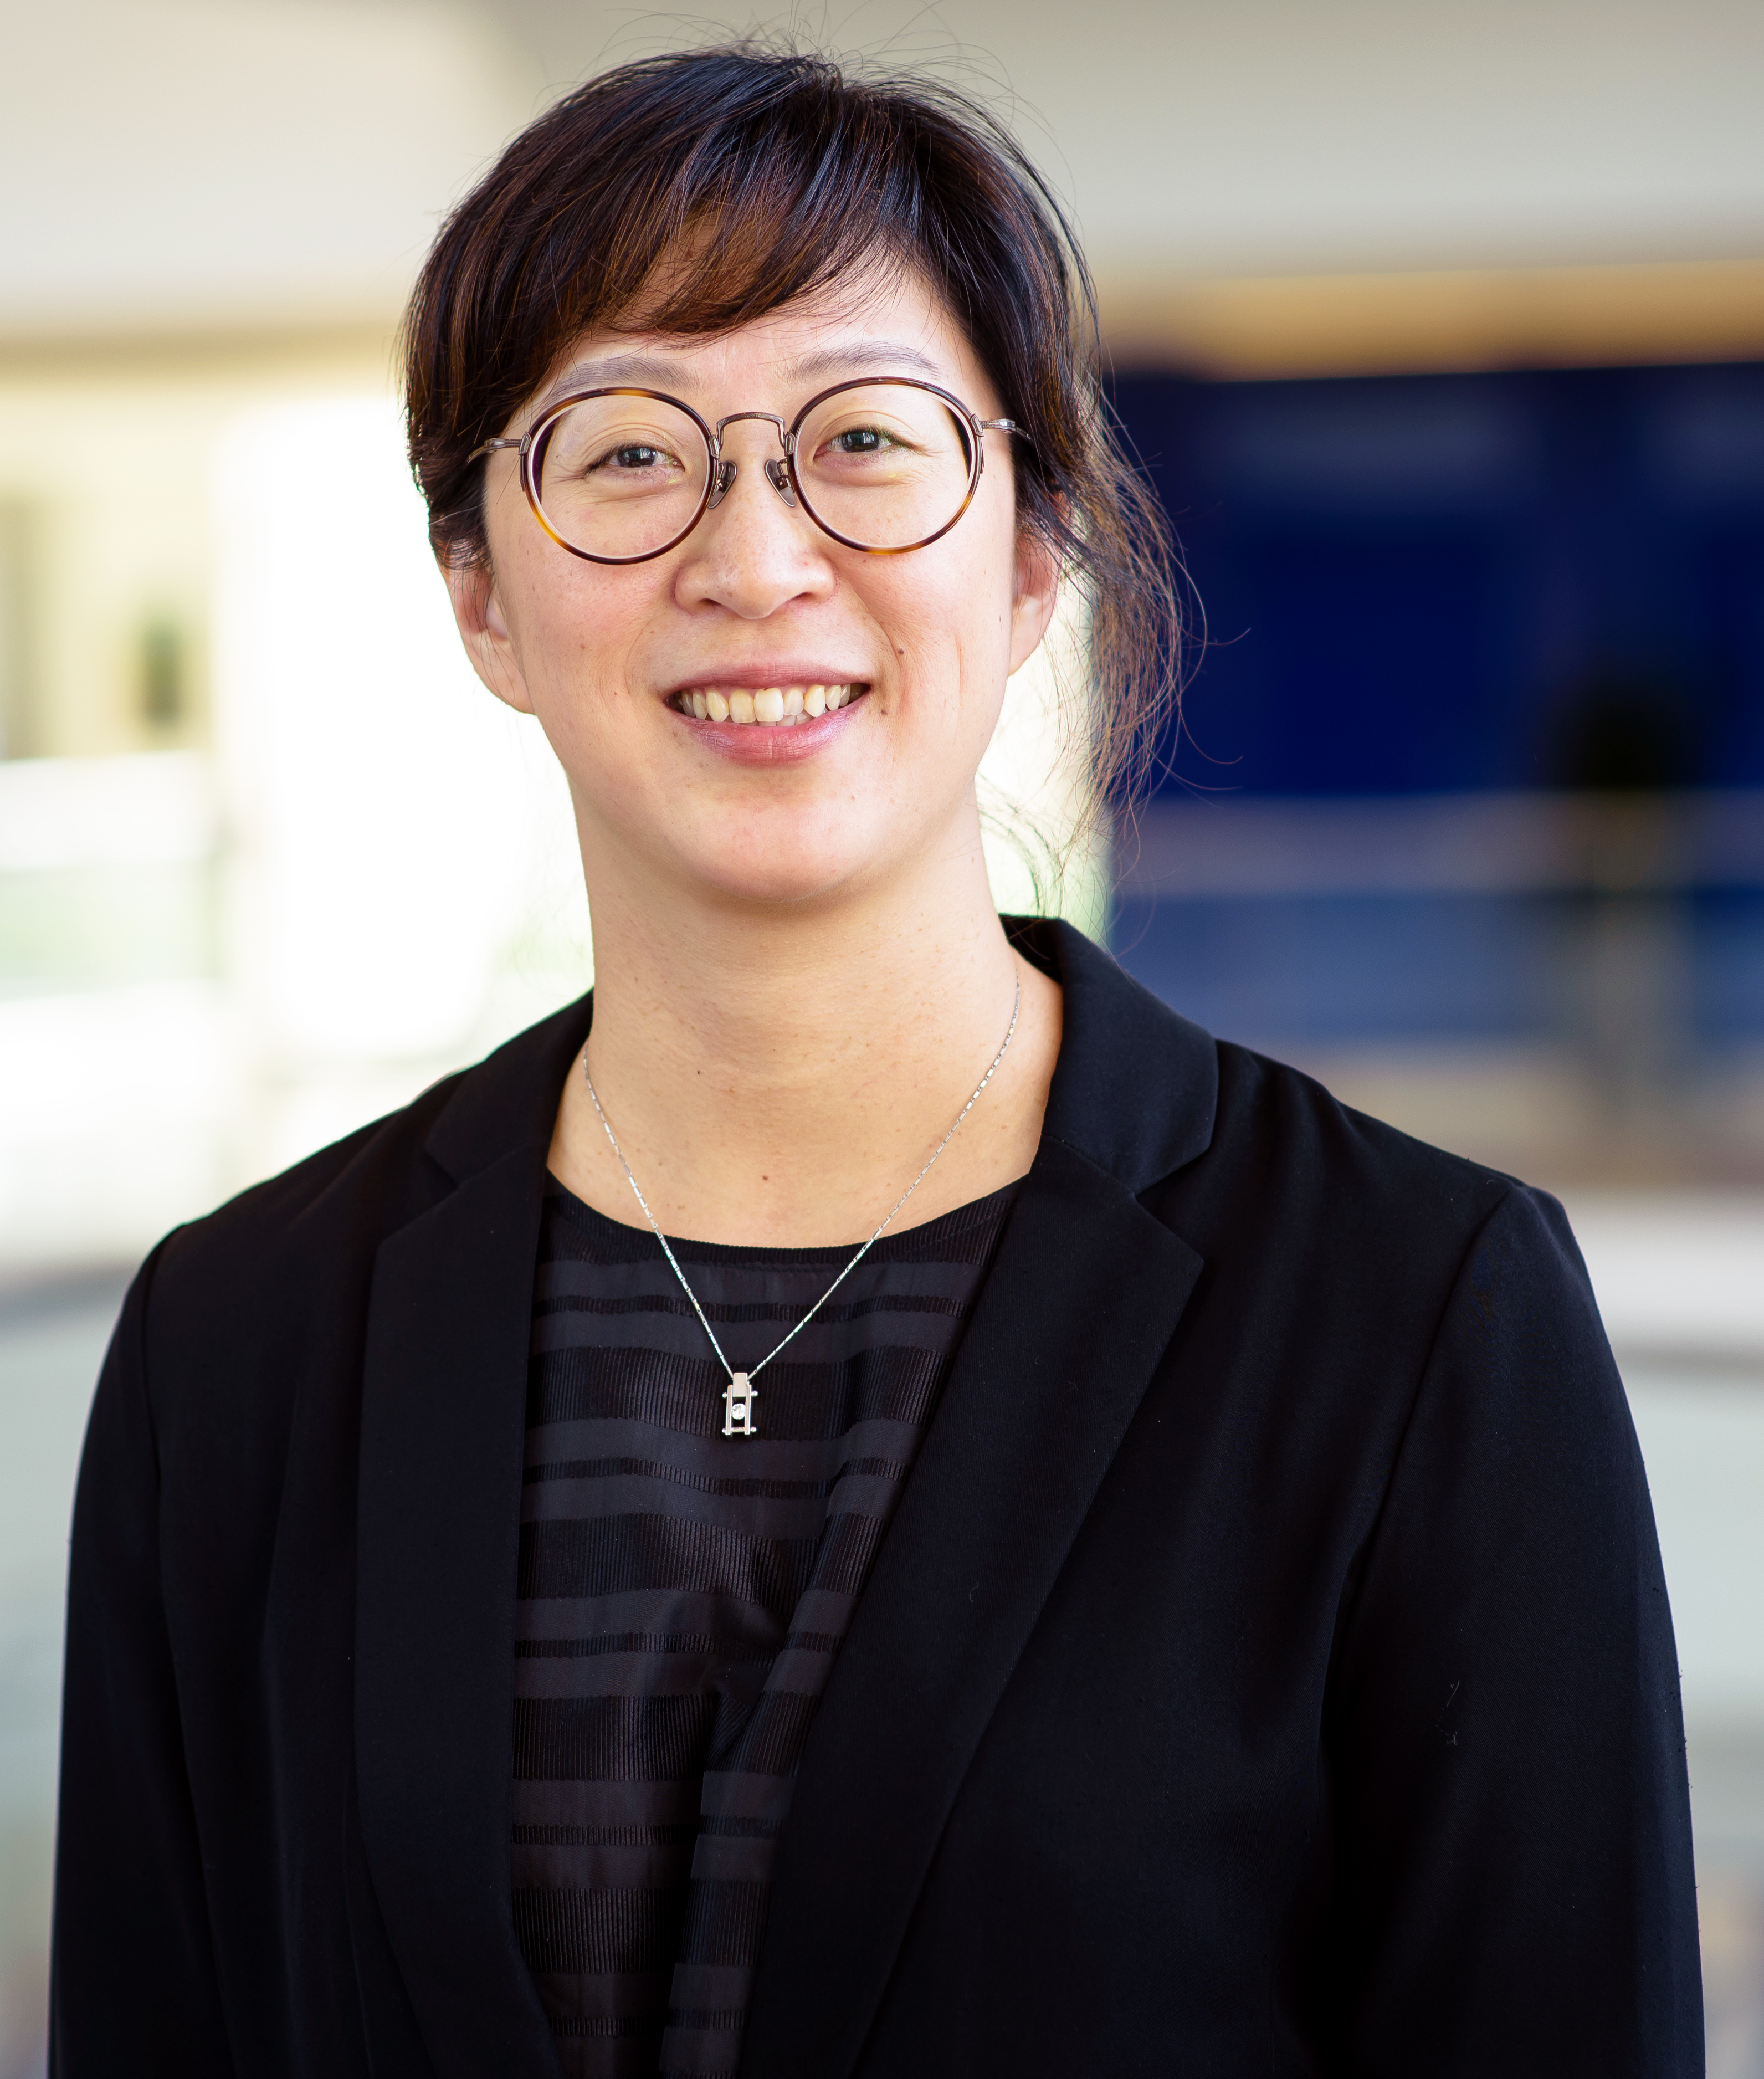 Yi-Ning (Winnie) Wu is an Associate Professor, Scientific Lead in Physiological Measurement at the UMass Lowell NERVE Center